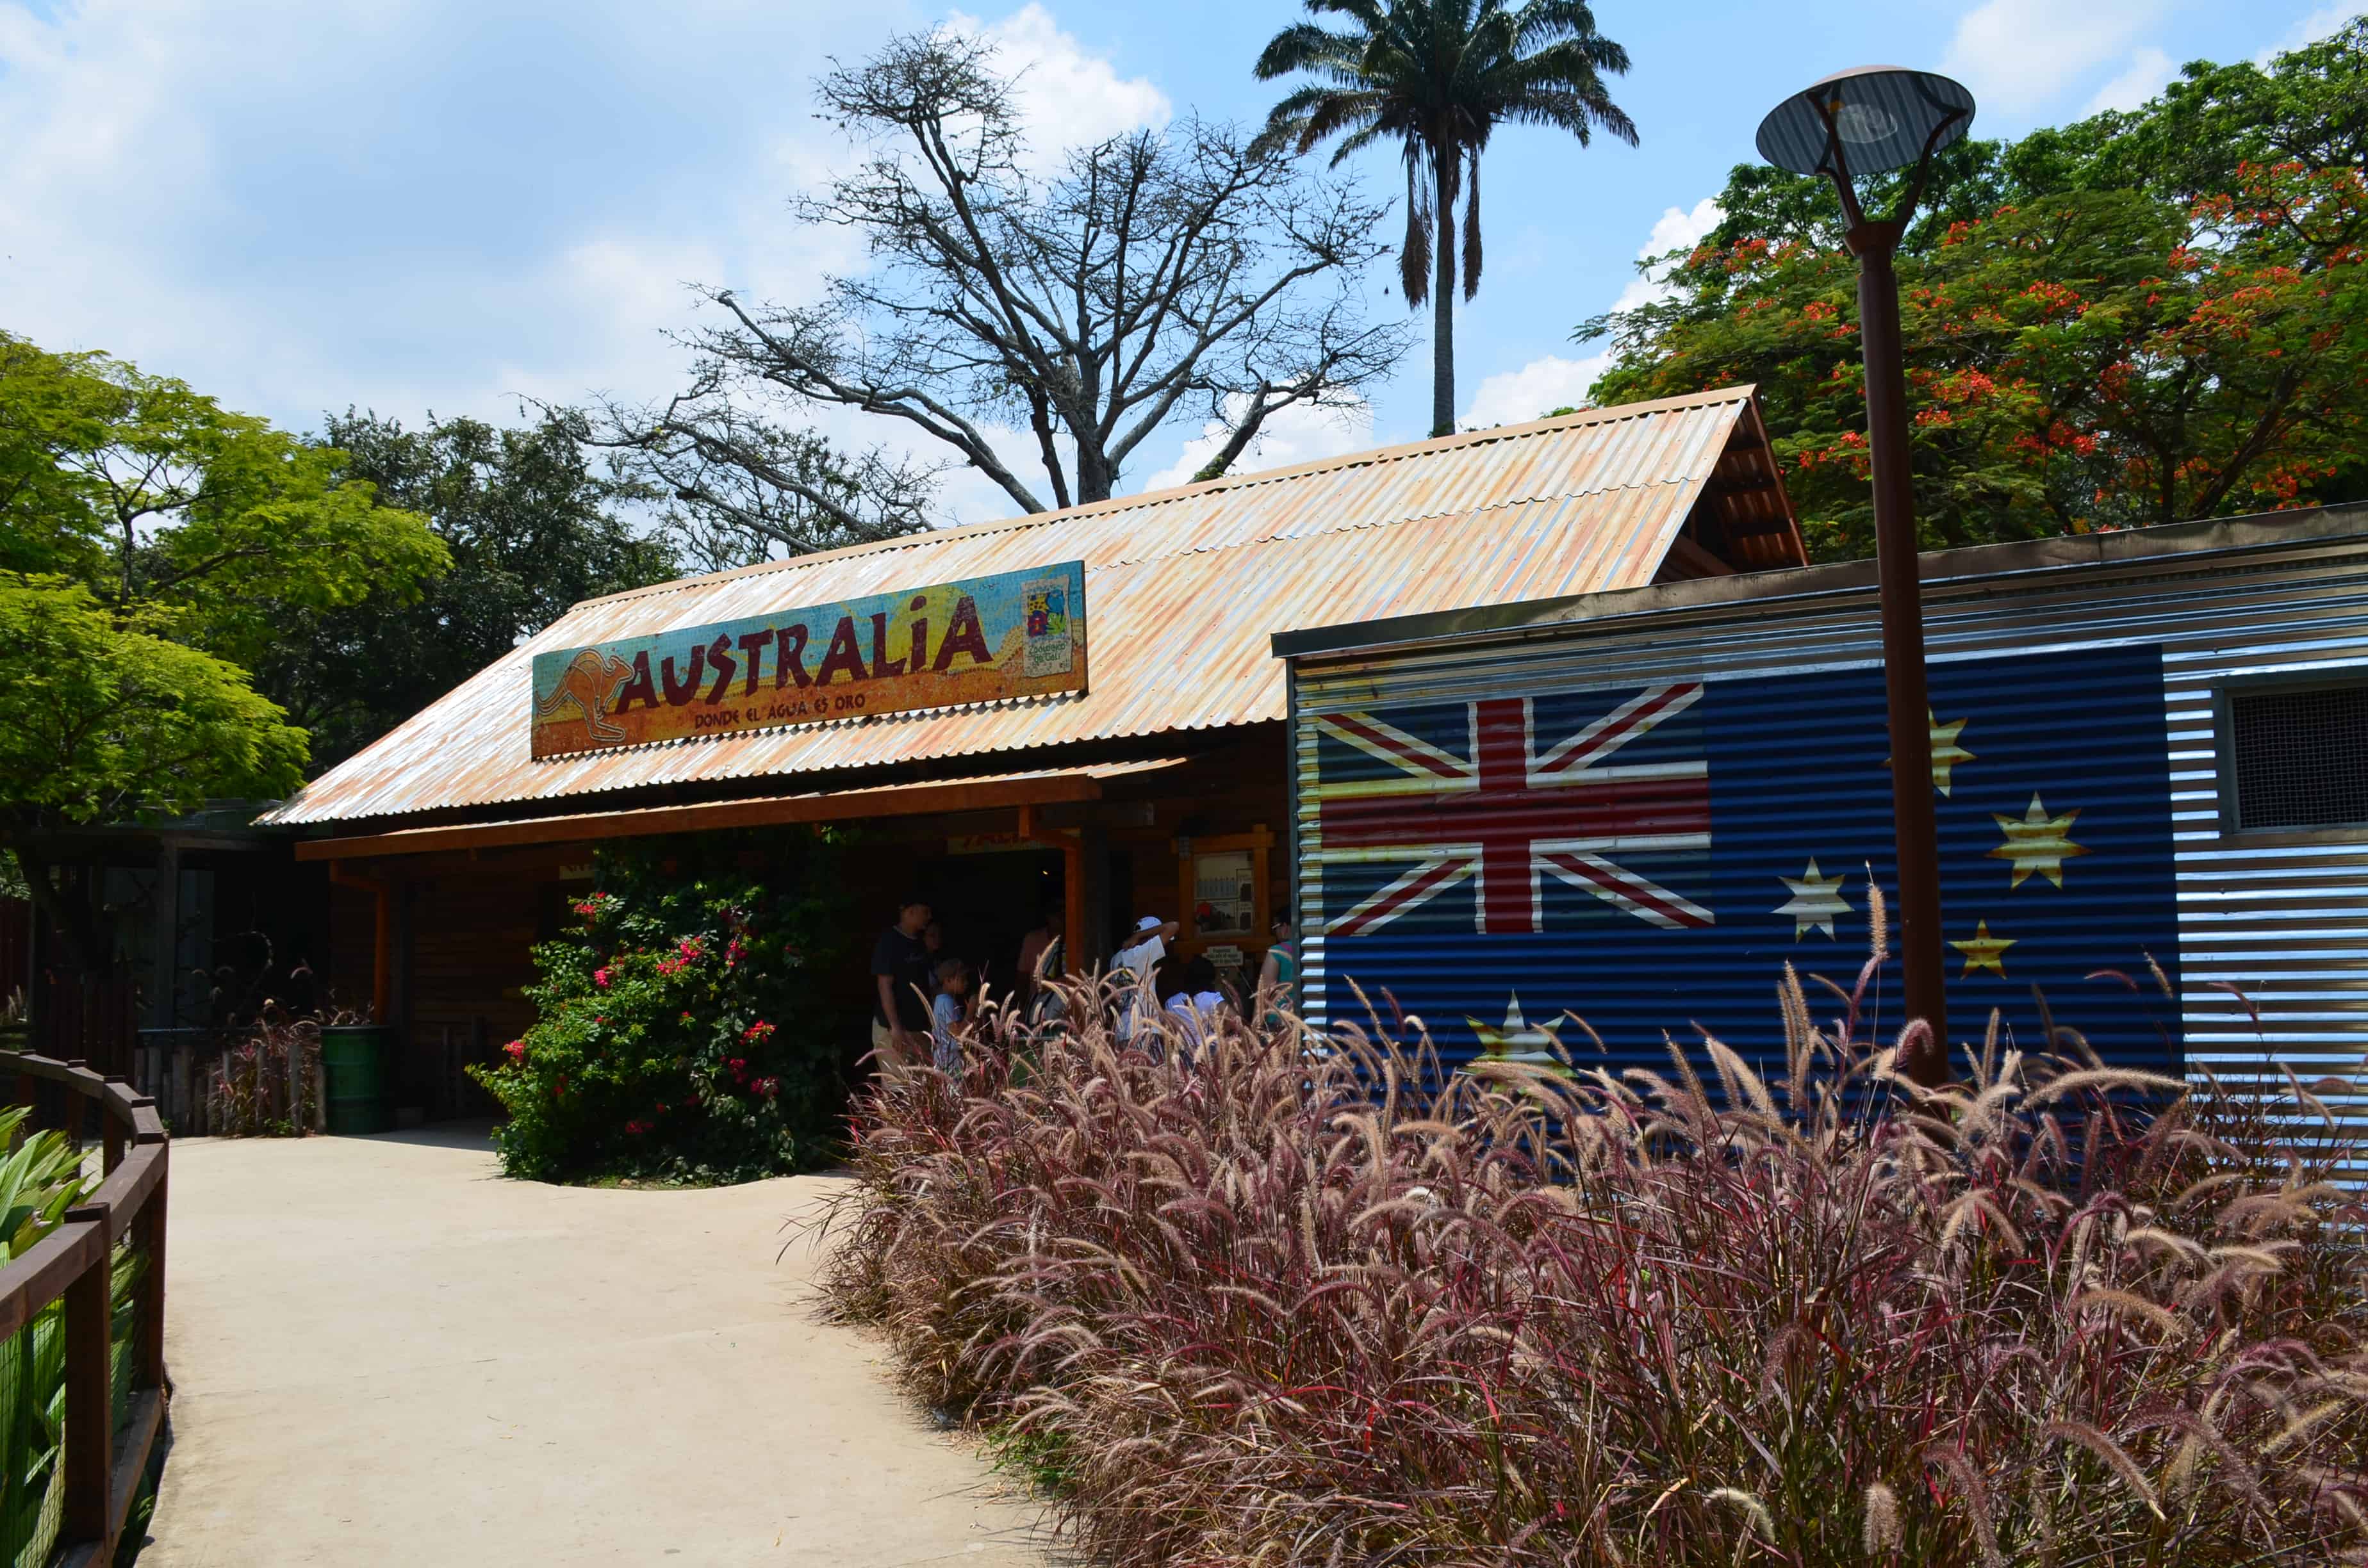 Australia exhibit at the Cali Zoo in Colombia